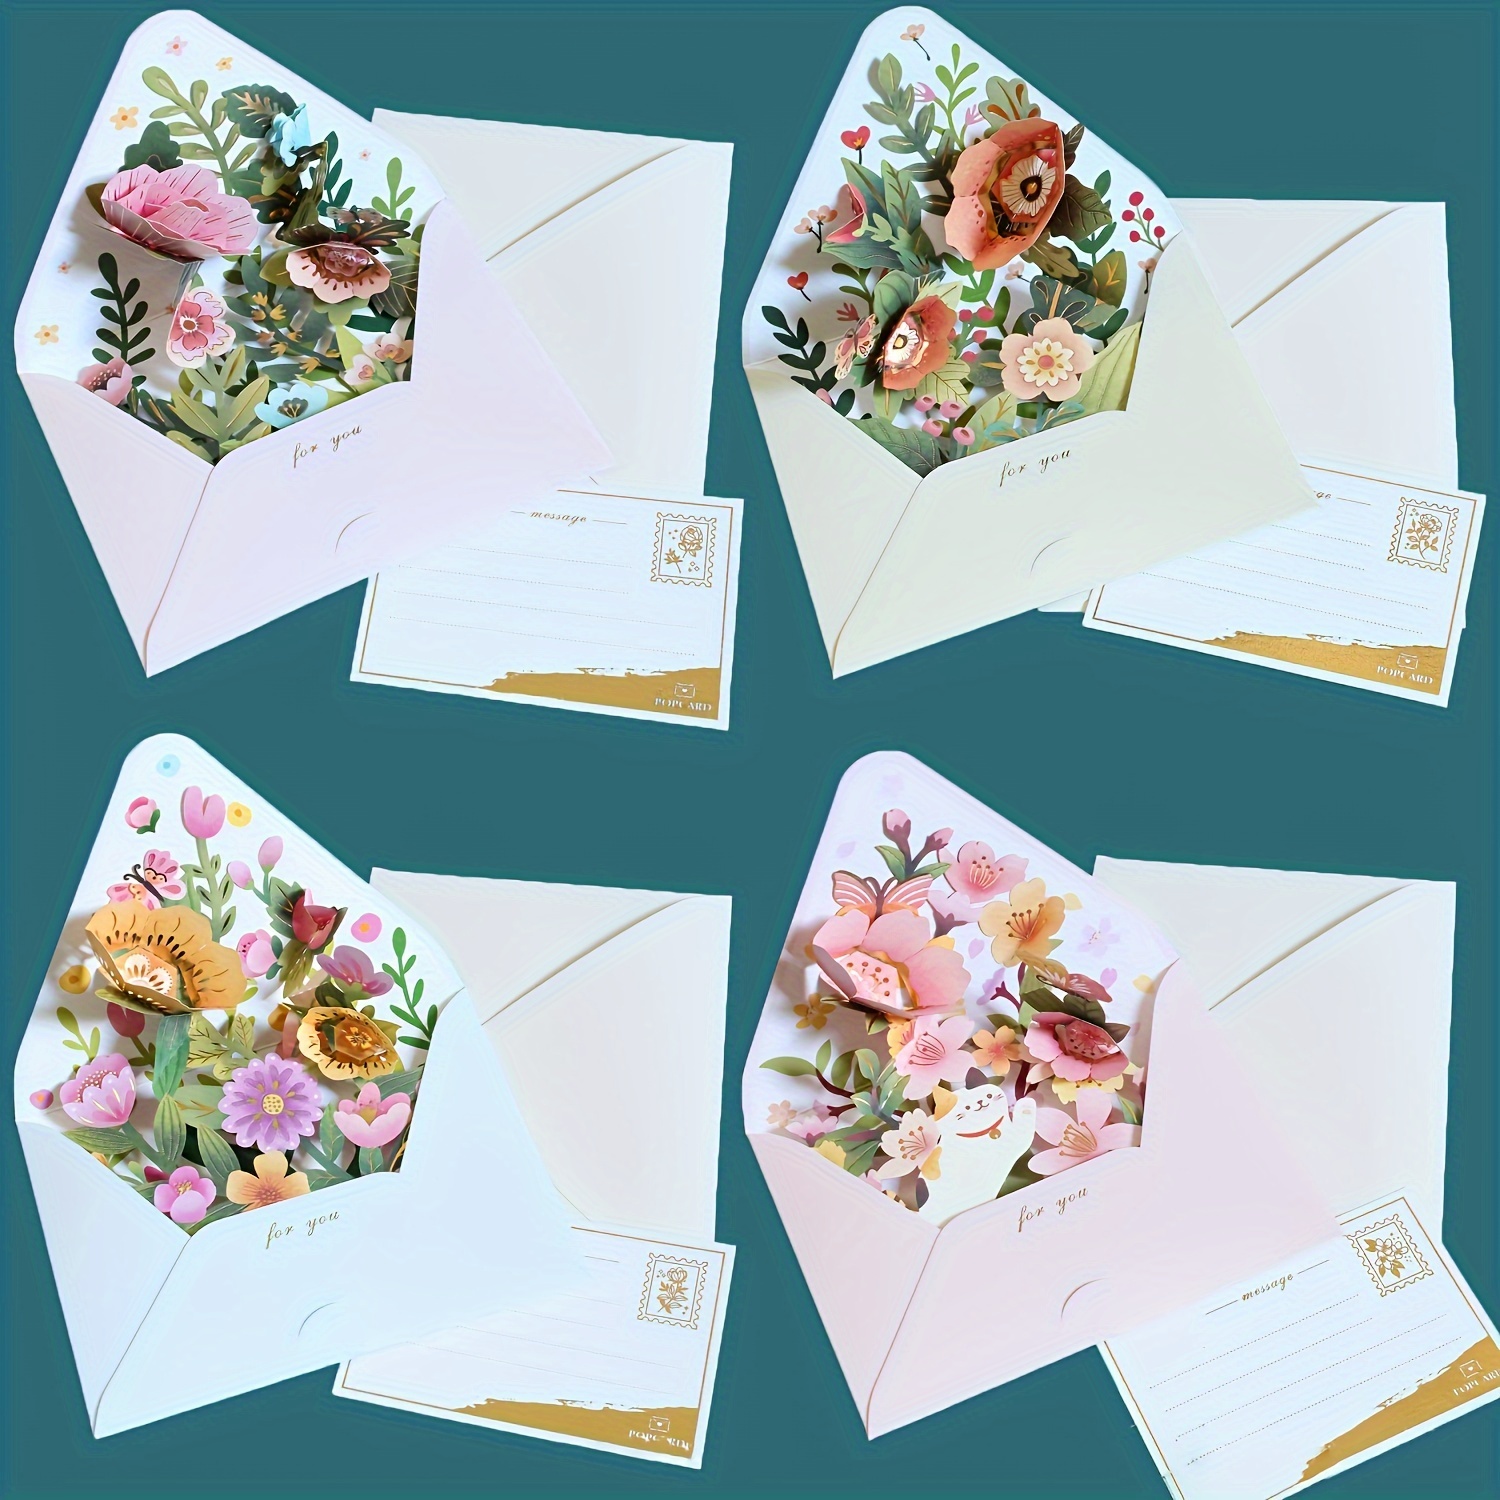 

4 Pcs Pop Up Cards Set: 3d Flowers Greeting Cards With Envelope And Tag - Perfect For Birthday, Anniversary, Thanksgiving, Mother's Day, Father's Day, Get Well, And All Occasions